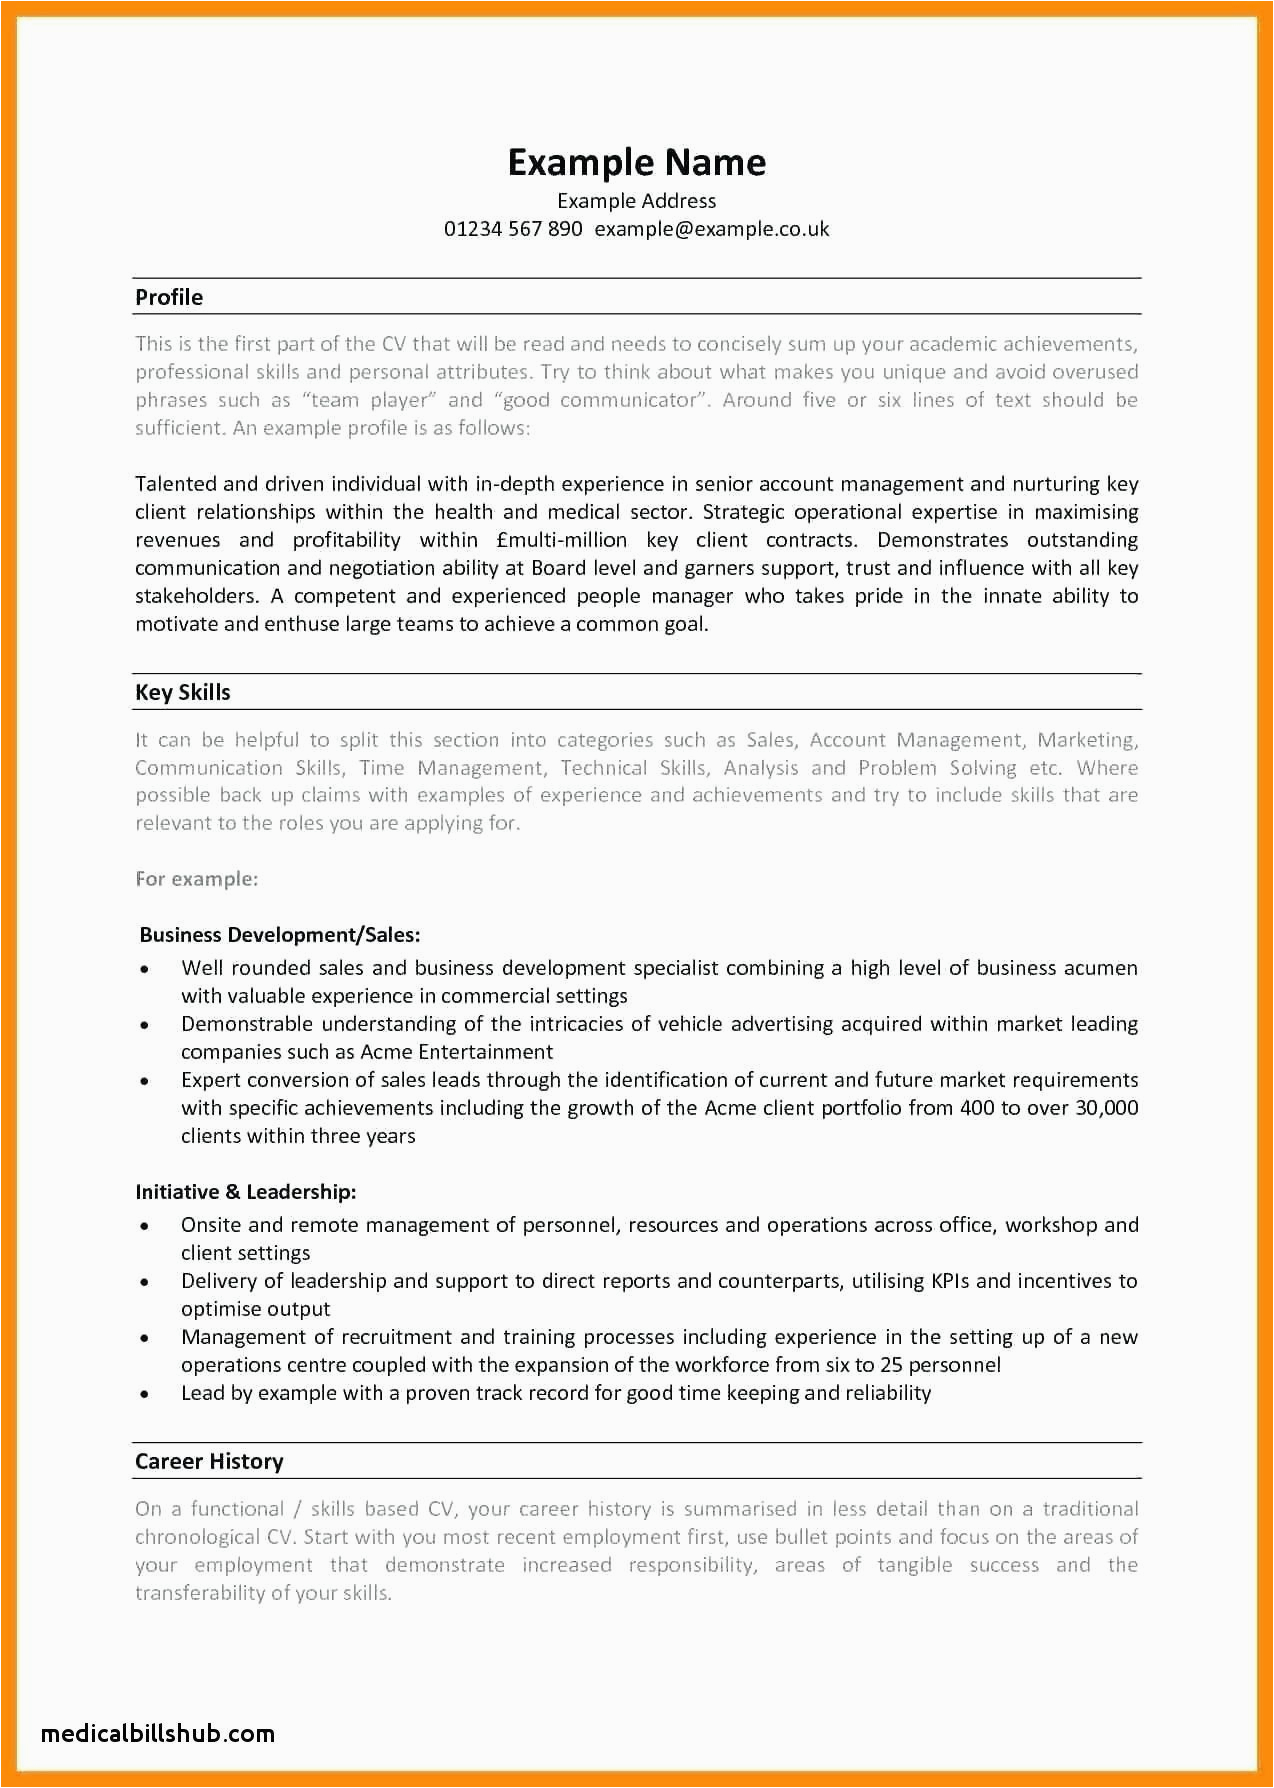 Sample Resume for A Mom Returning to Work Resumes for Moms Returning to Work Examples In 2021